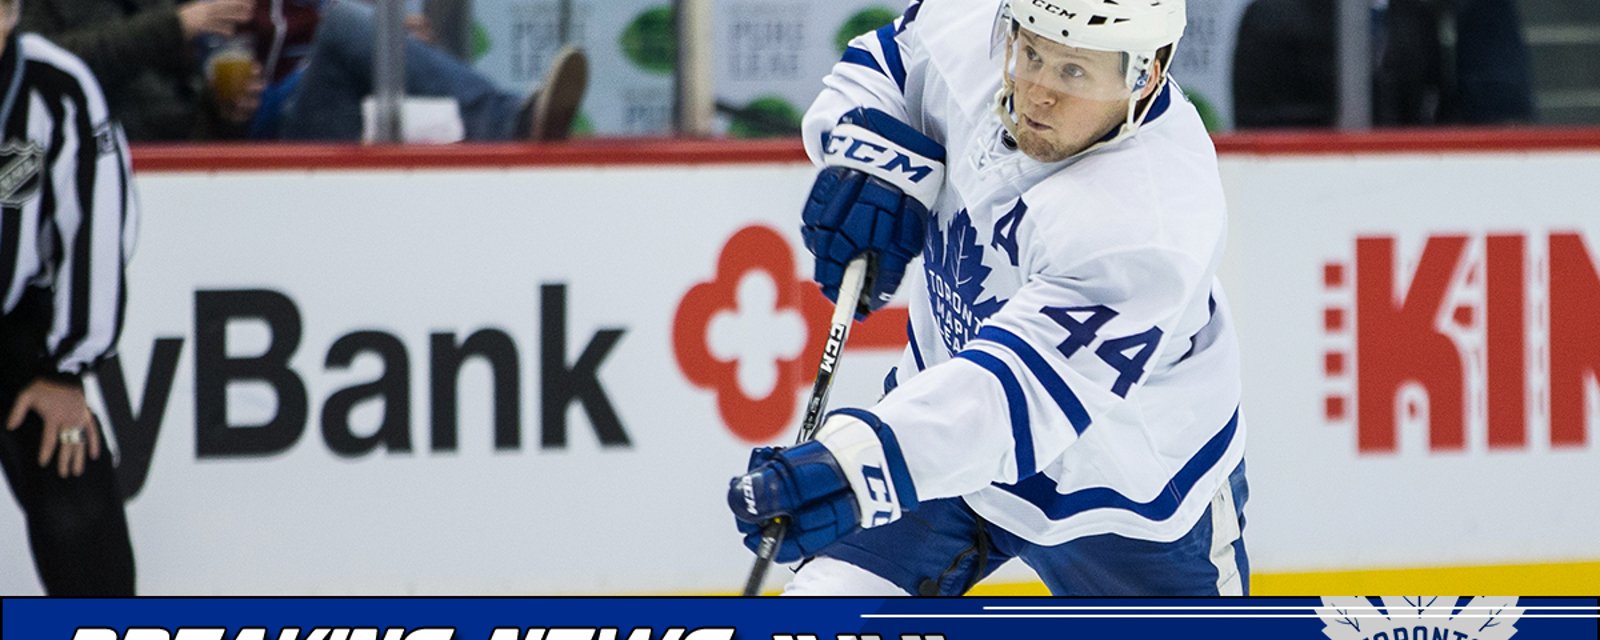 Breaking: The worst is confirmed for Rielly!